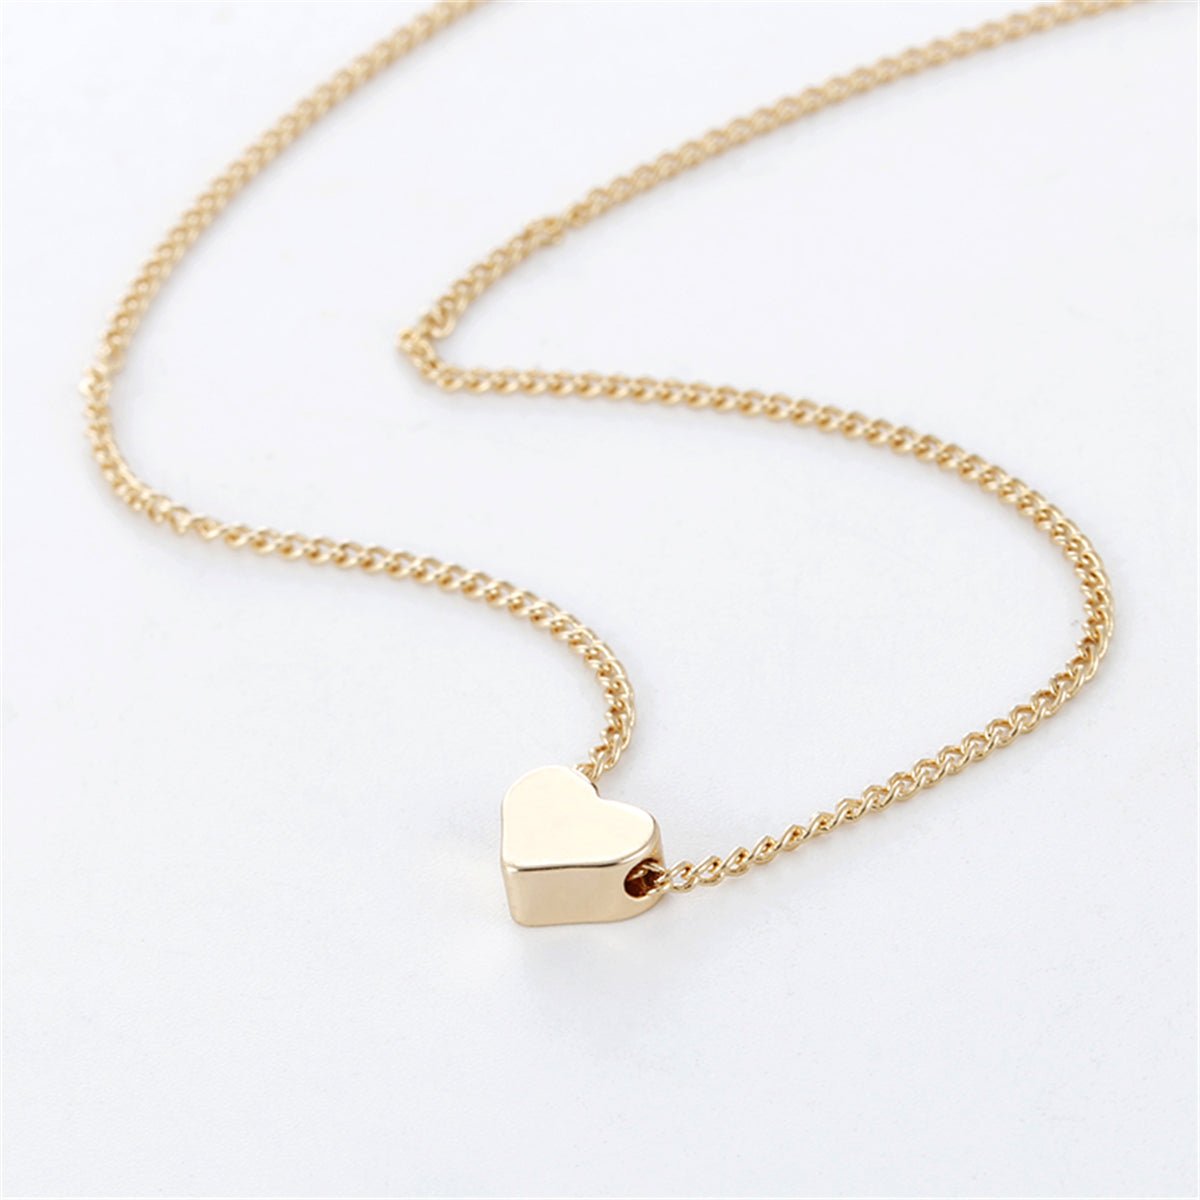 Gold Love Pendant Clavicle Chain Necklace | TrendyAffordables - TrendyAffordables - 4